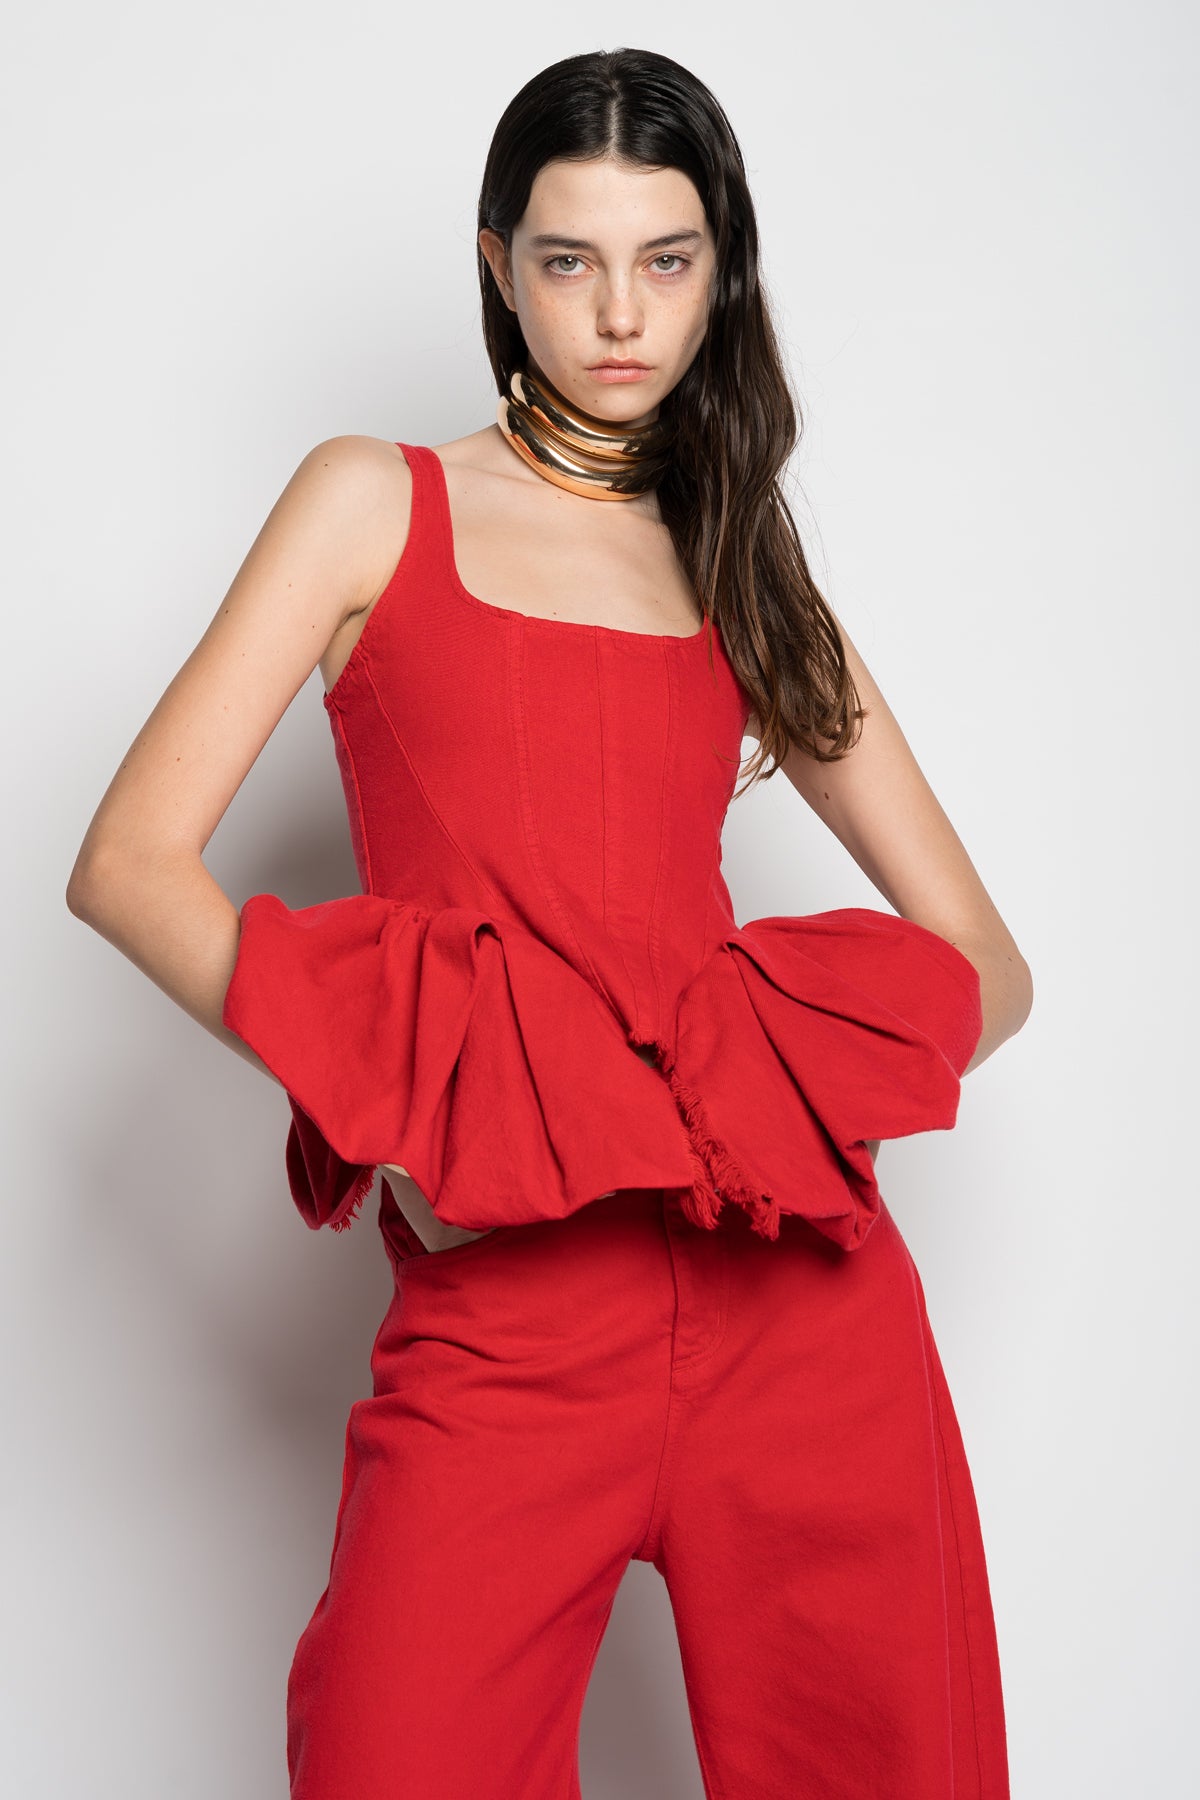 RED CORSET WITH PLEATED HIP PANELS marques almeida